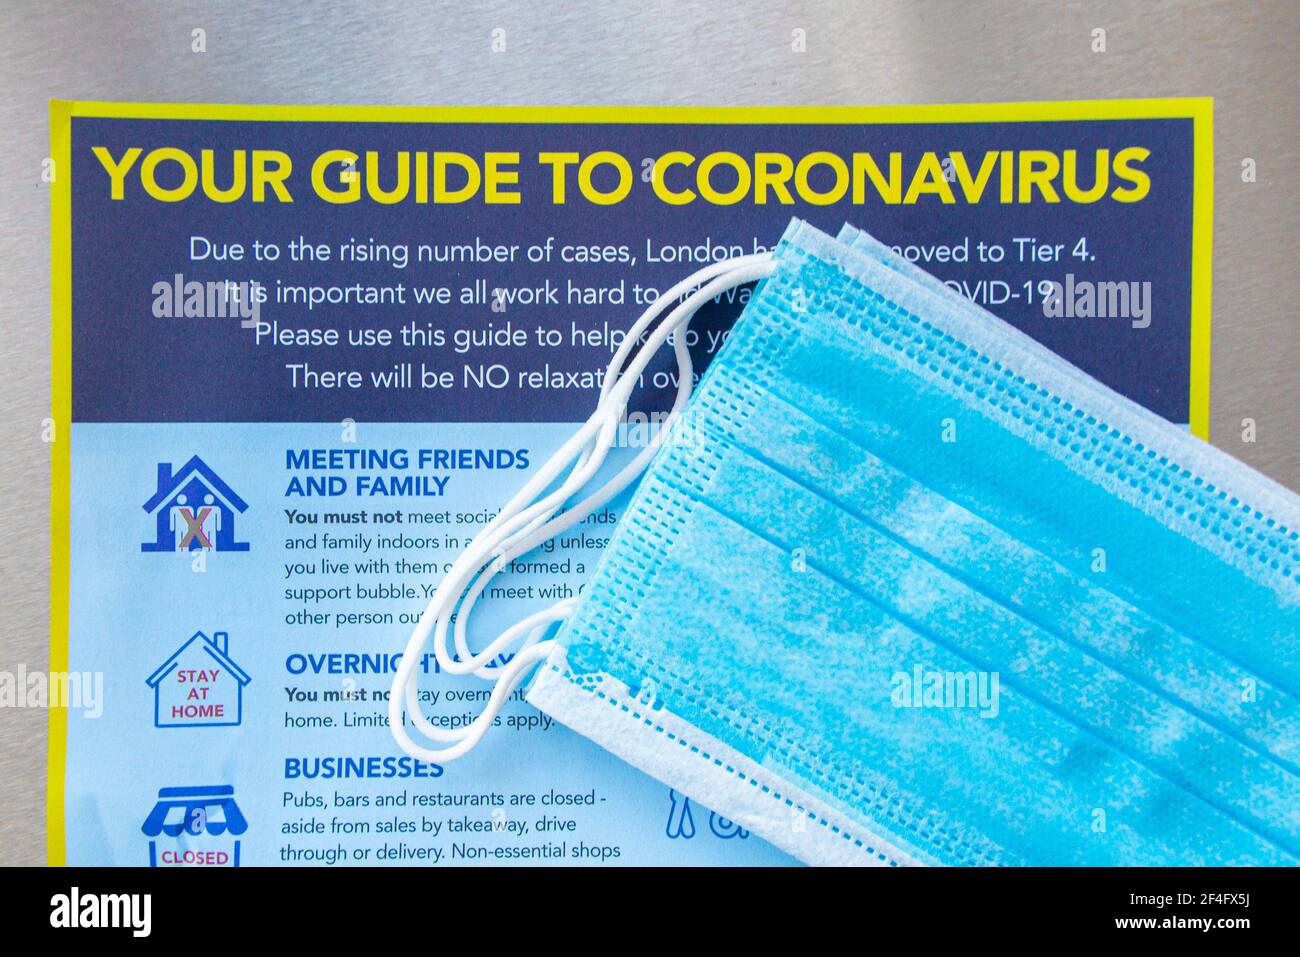 A facemask and Guide to Coronavirus  during lockdown Stock Photo